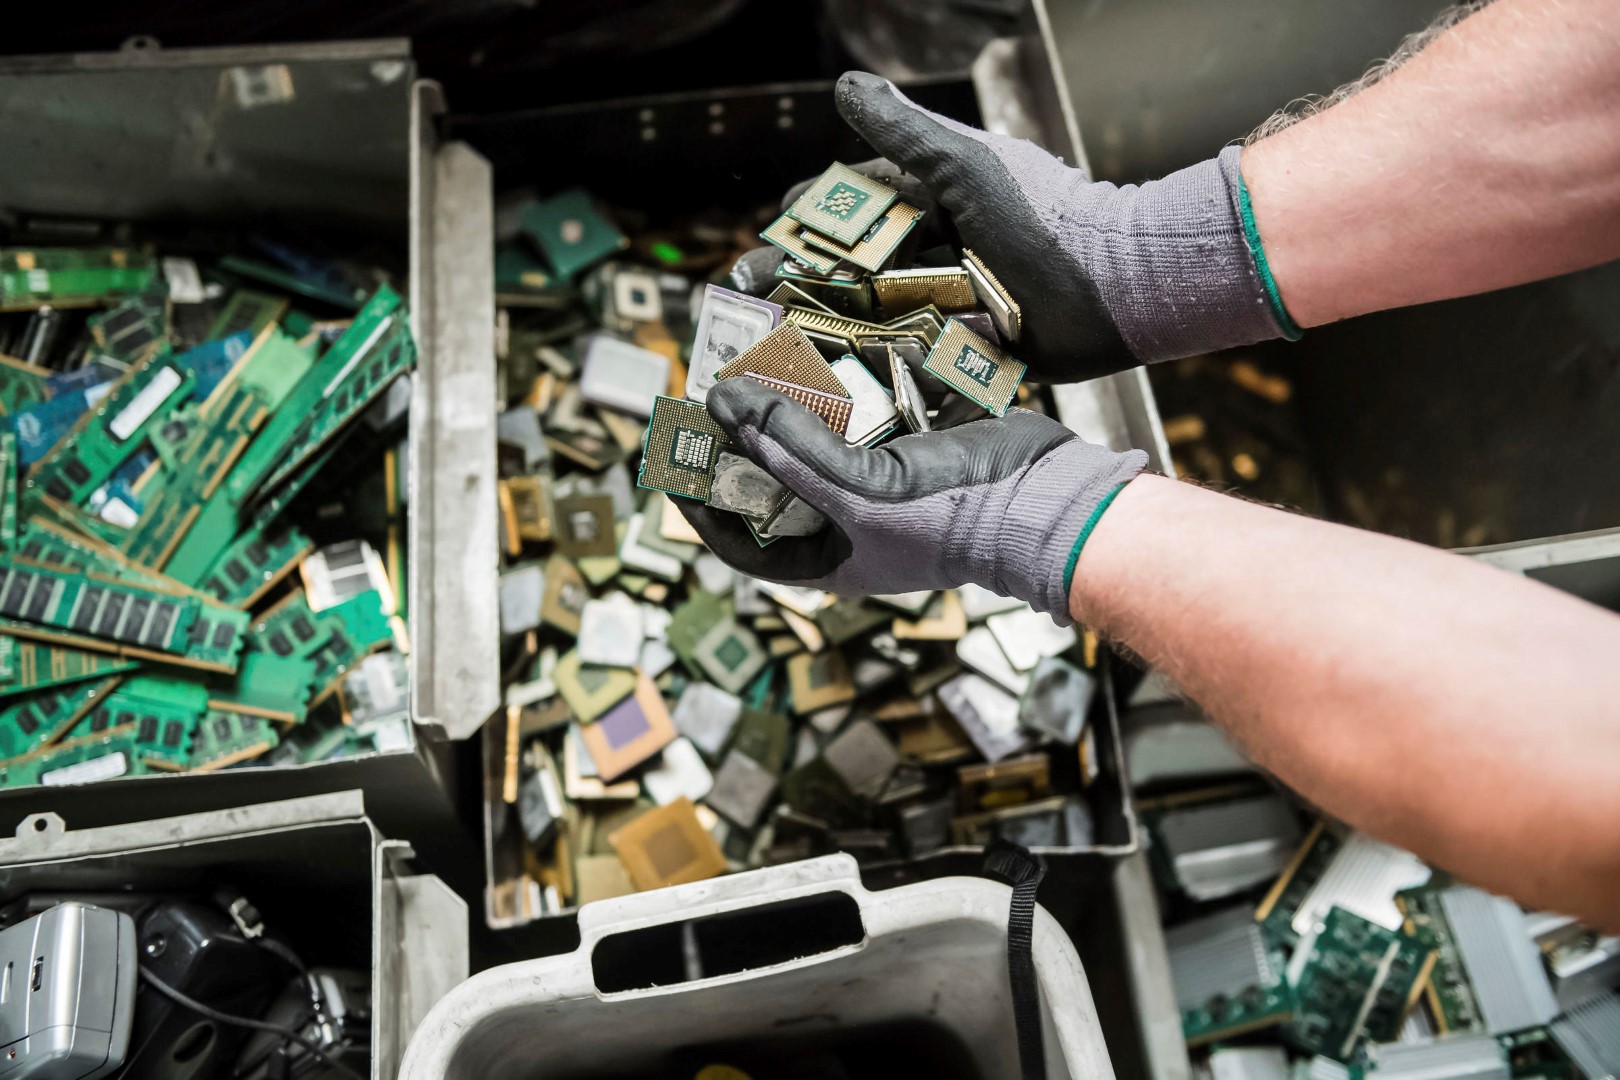 In this photo taken on July 13, 2018, a worker handles components of electronic elements at the Out Of Use company warehouse in Beringen, Belgium. Out Of Use dismantles computer, office and other equipment and recuperates an average of around 90 percent of the raw materials from electronic waste. (AP Photo/Geert Vanden Wijngaert)